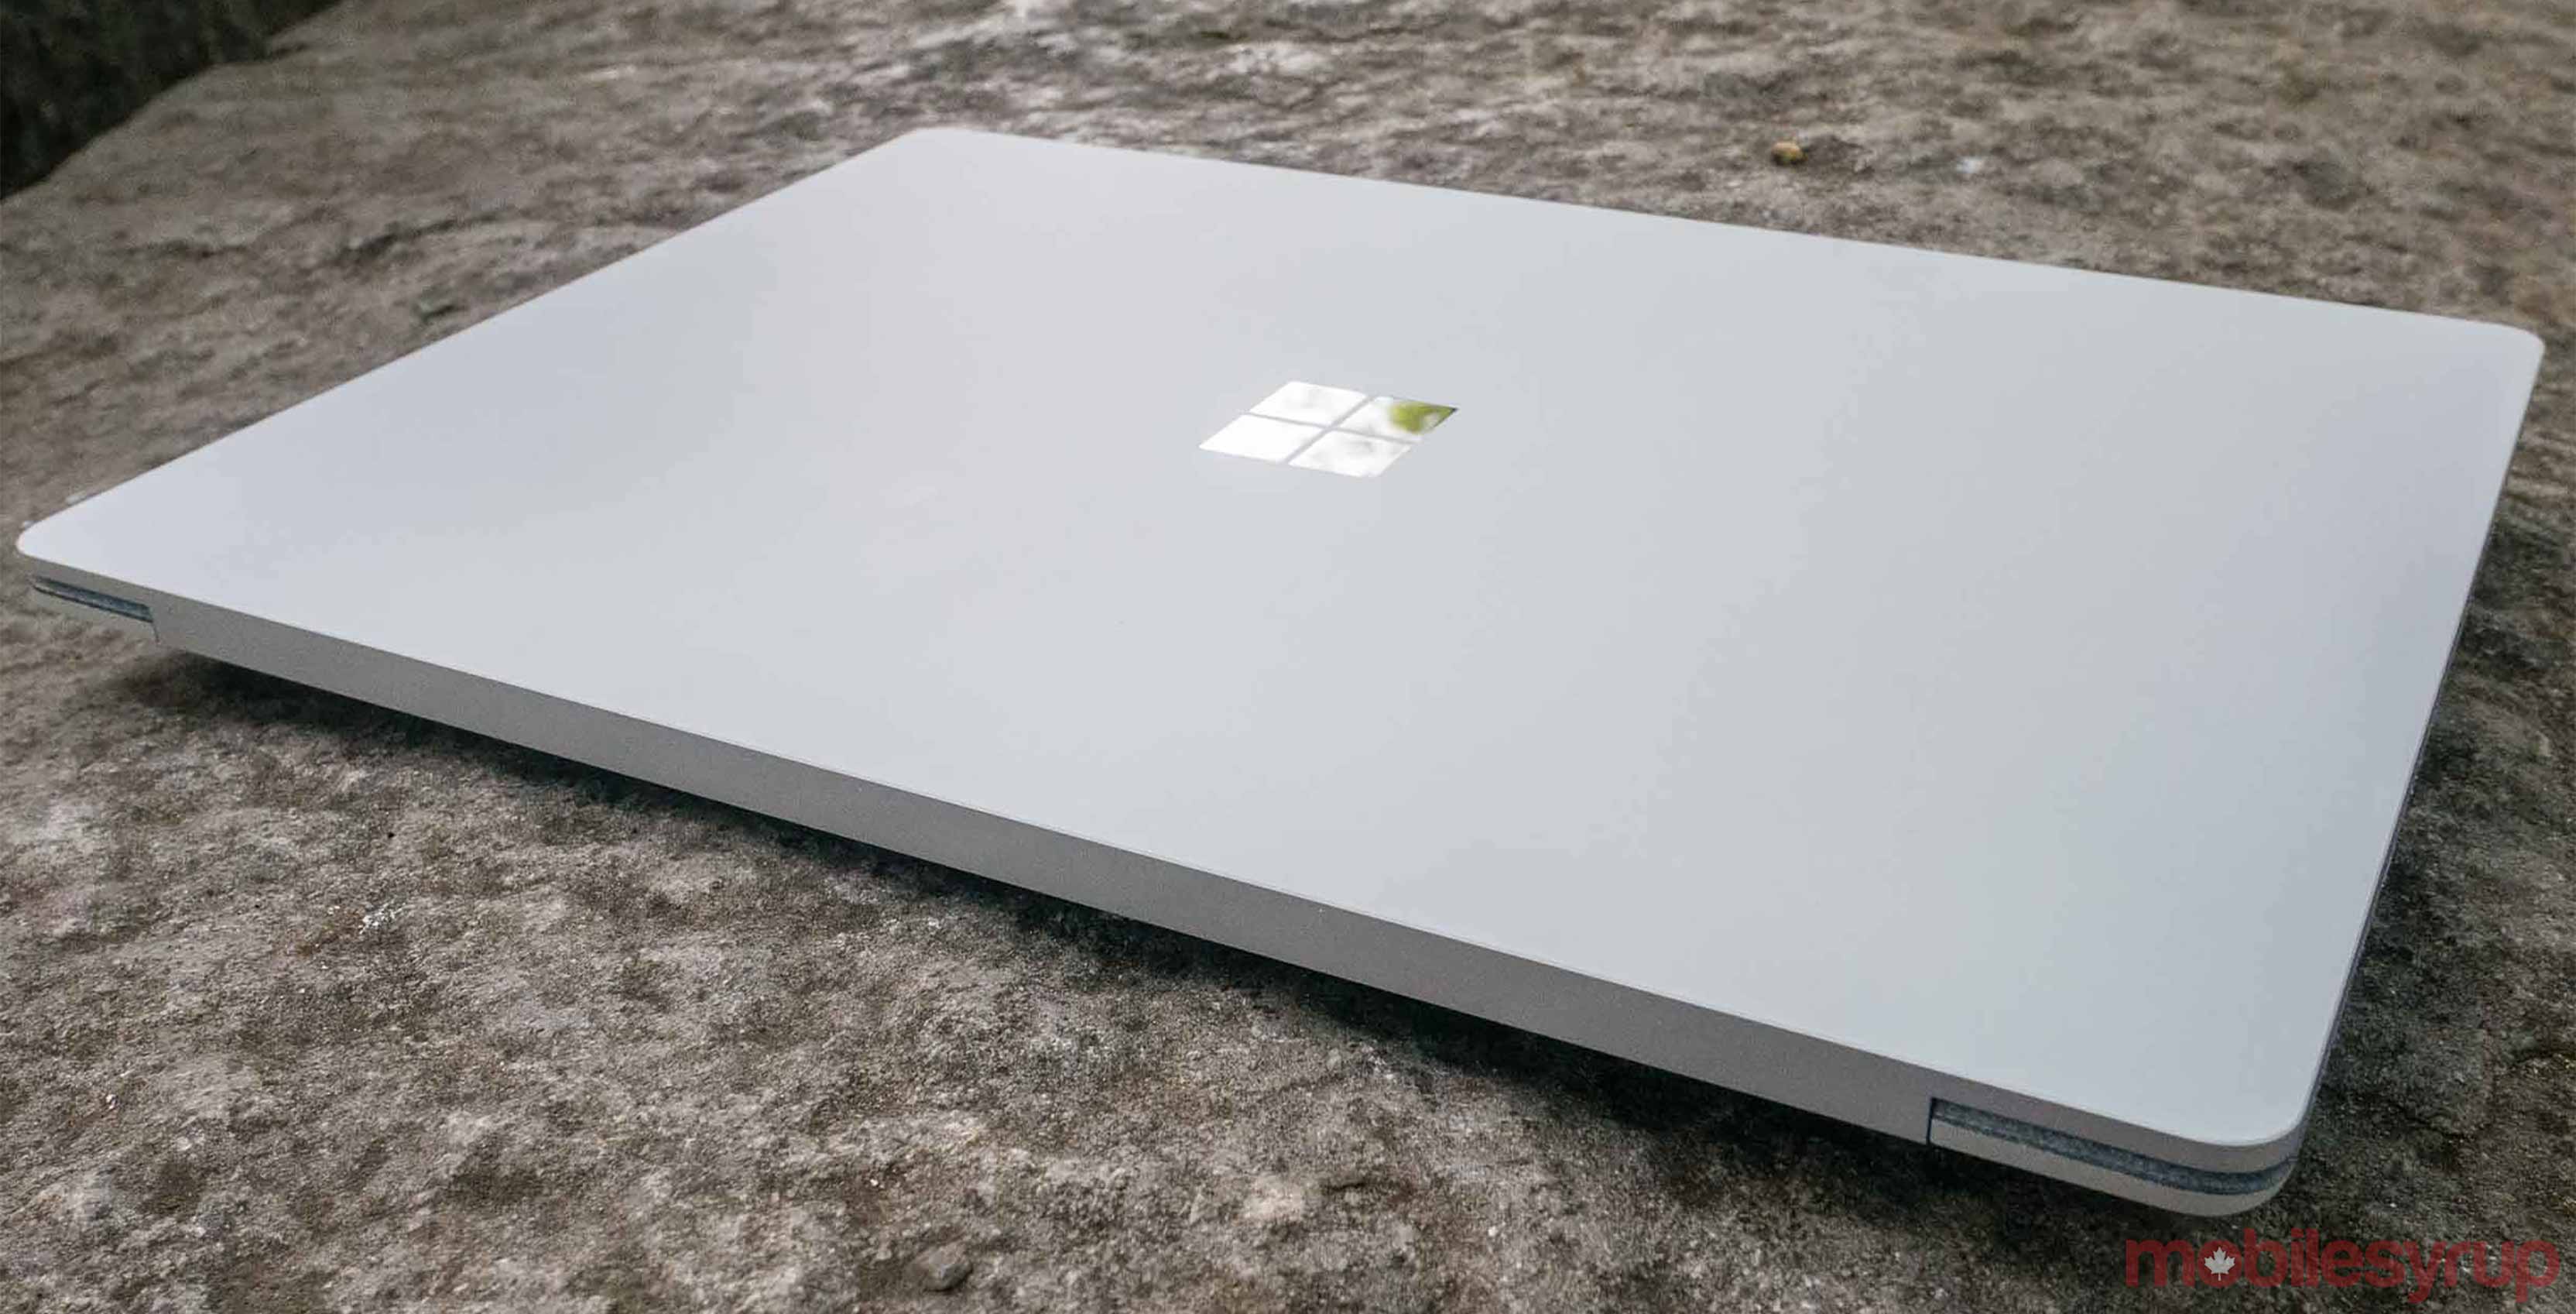 Surface Laptop on a table